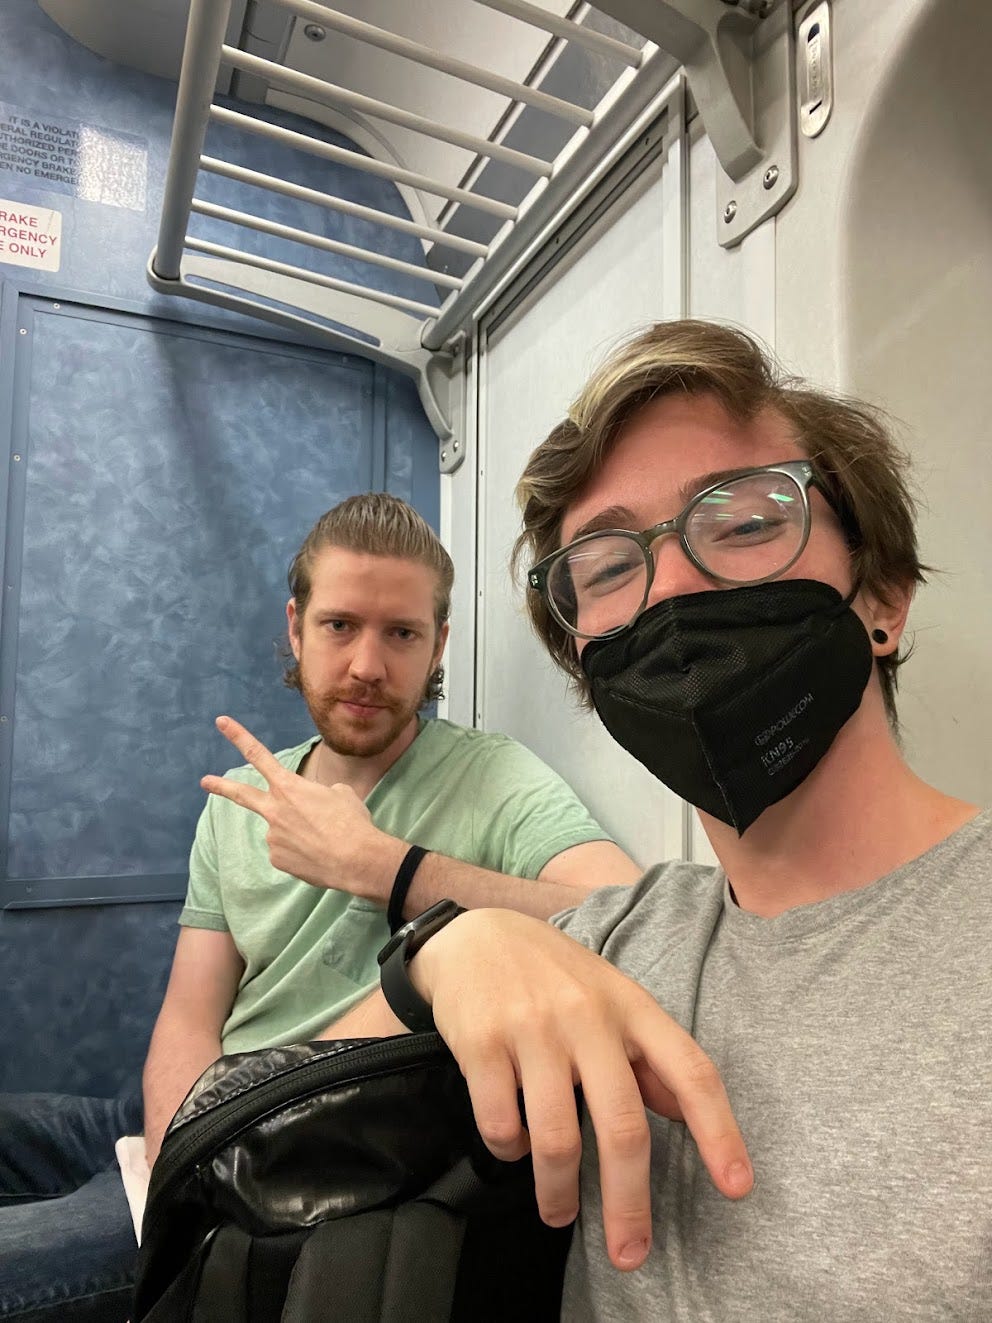 A blond white man makes a peace sign next to a brown-haired person wearing a mask on a train